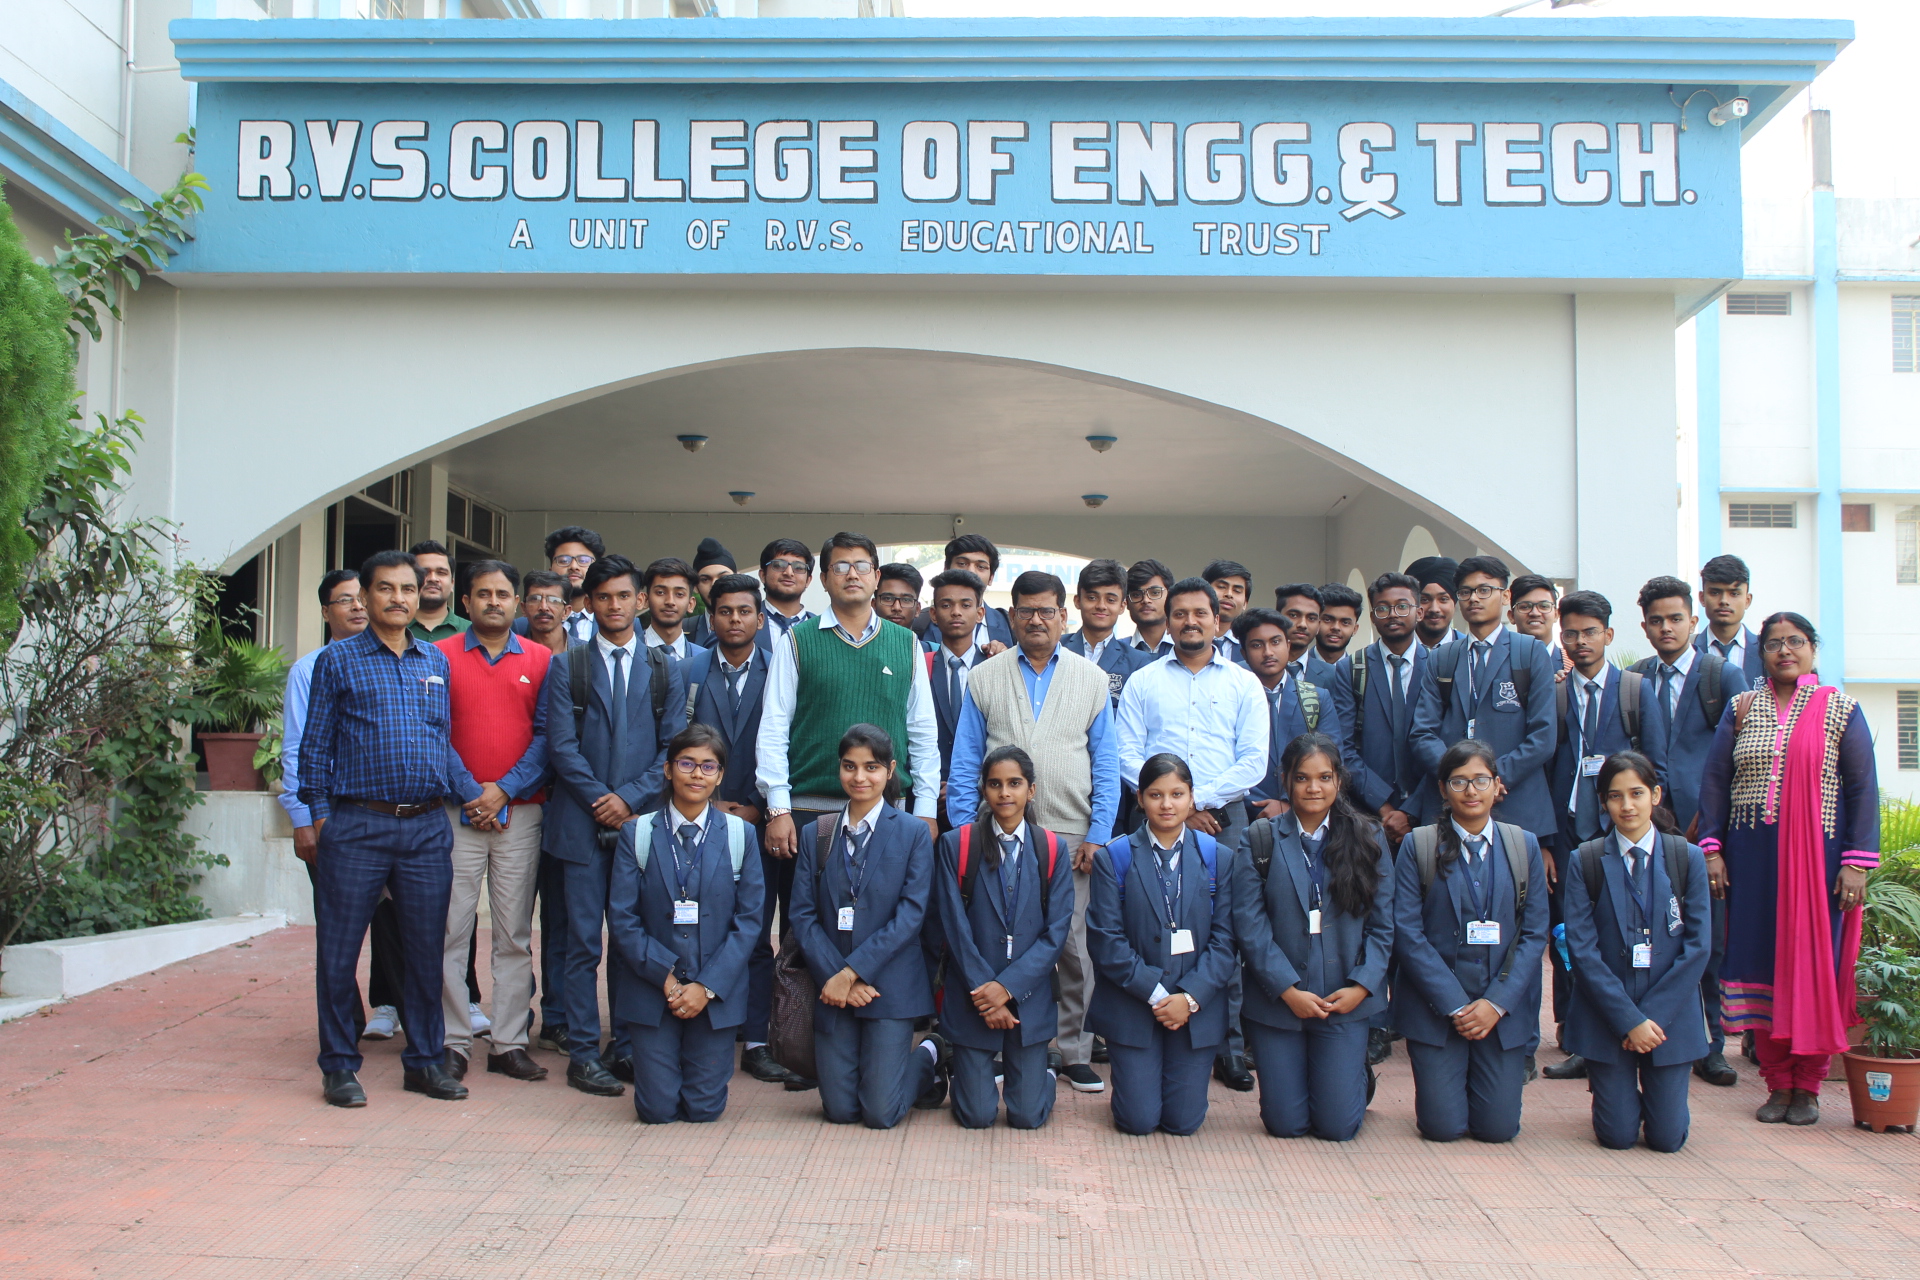 R.V.S. Academy students visit R.V.S. College of Engineering and Technology.